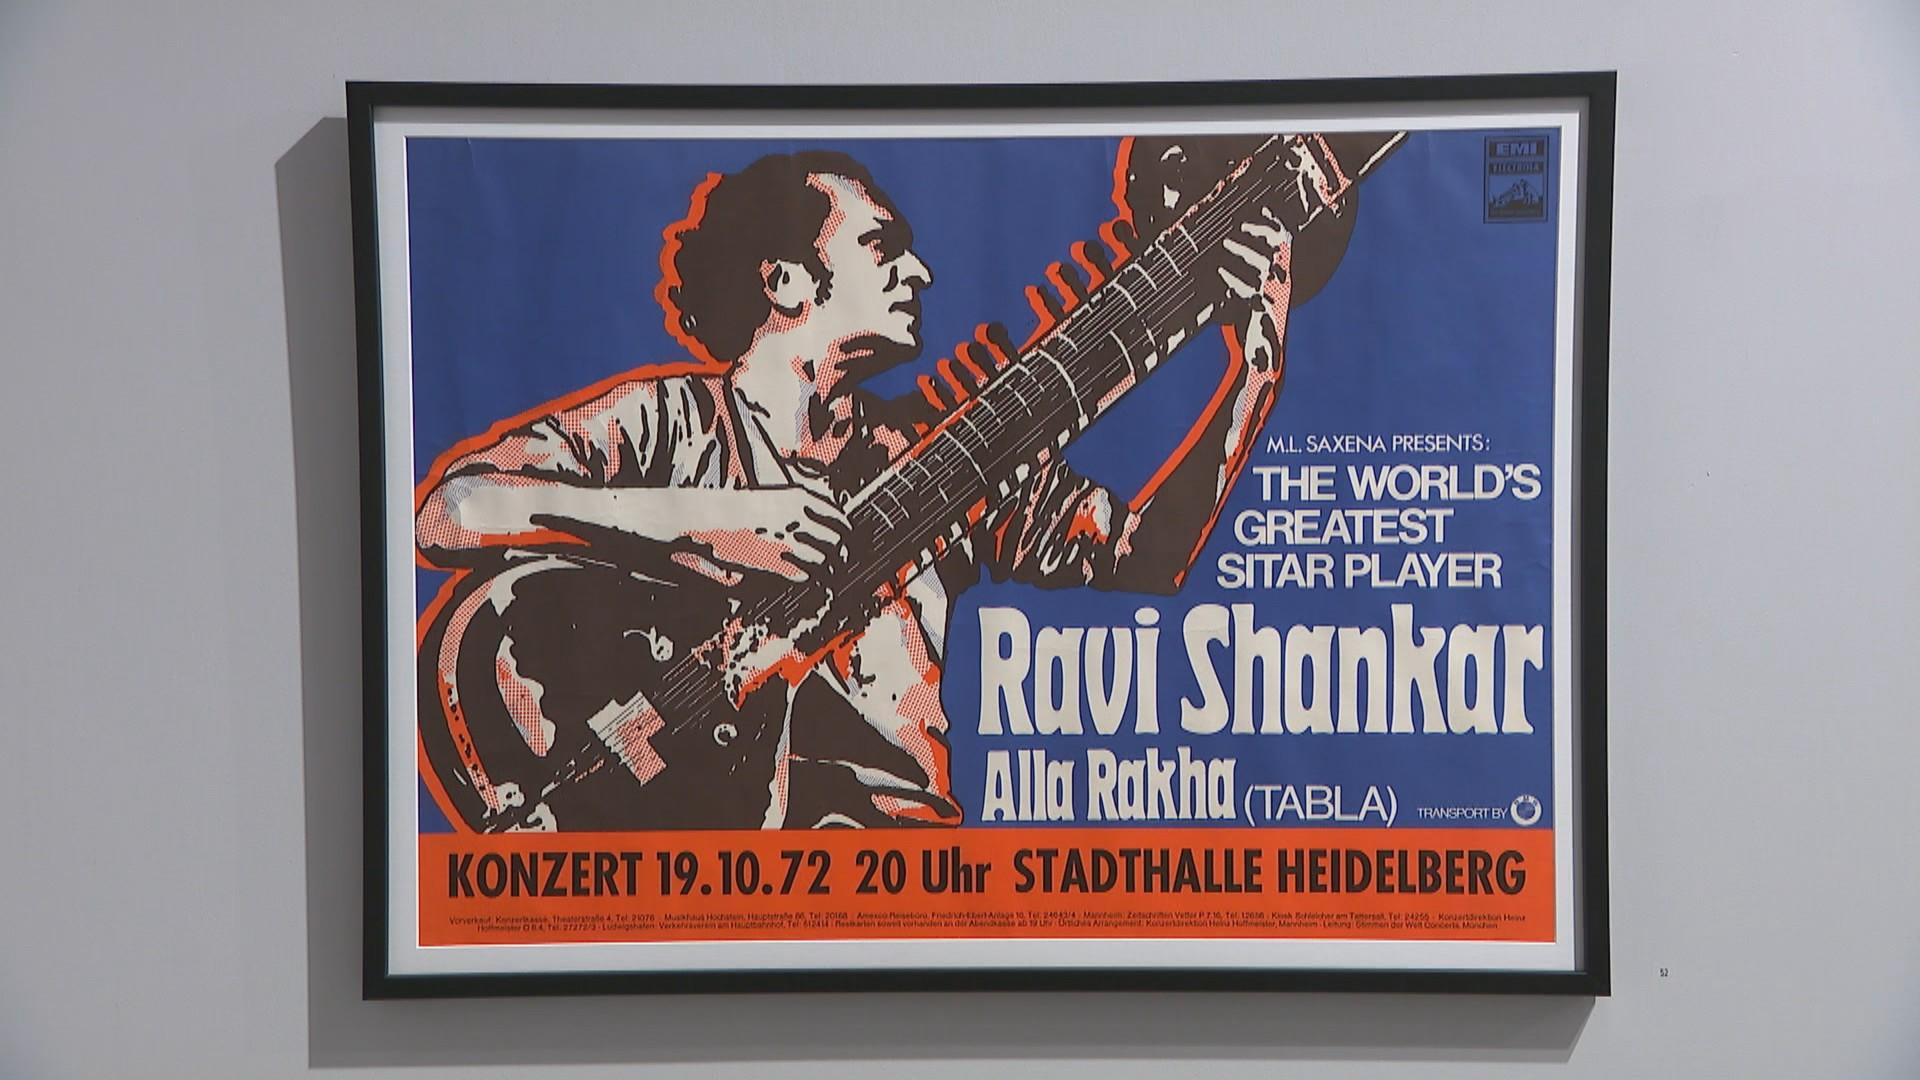 An exhibit on sitarist Ravi Shankar is on display at the South Asia Instiute. (WTTW News)